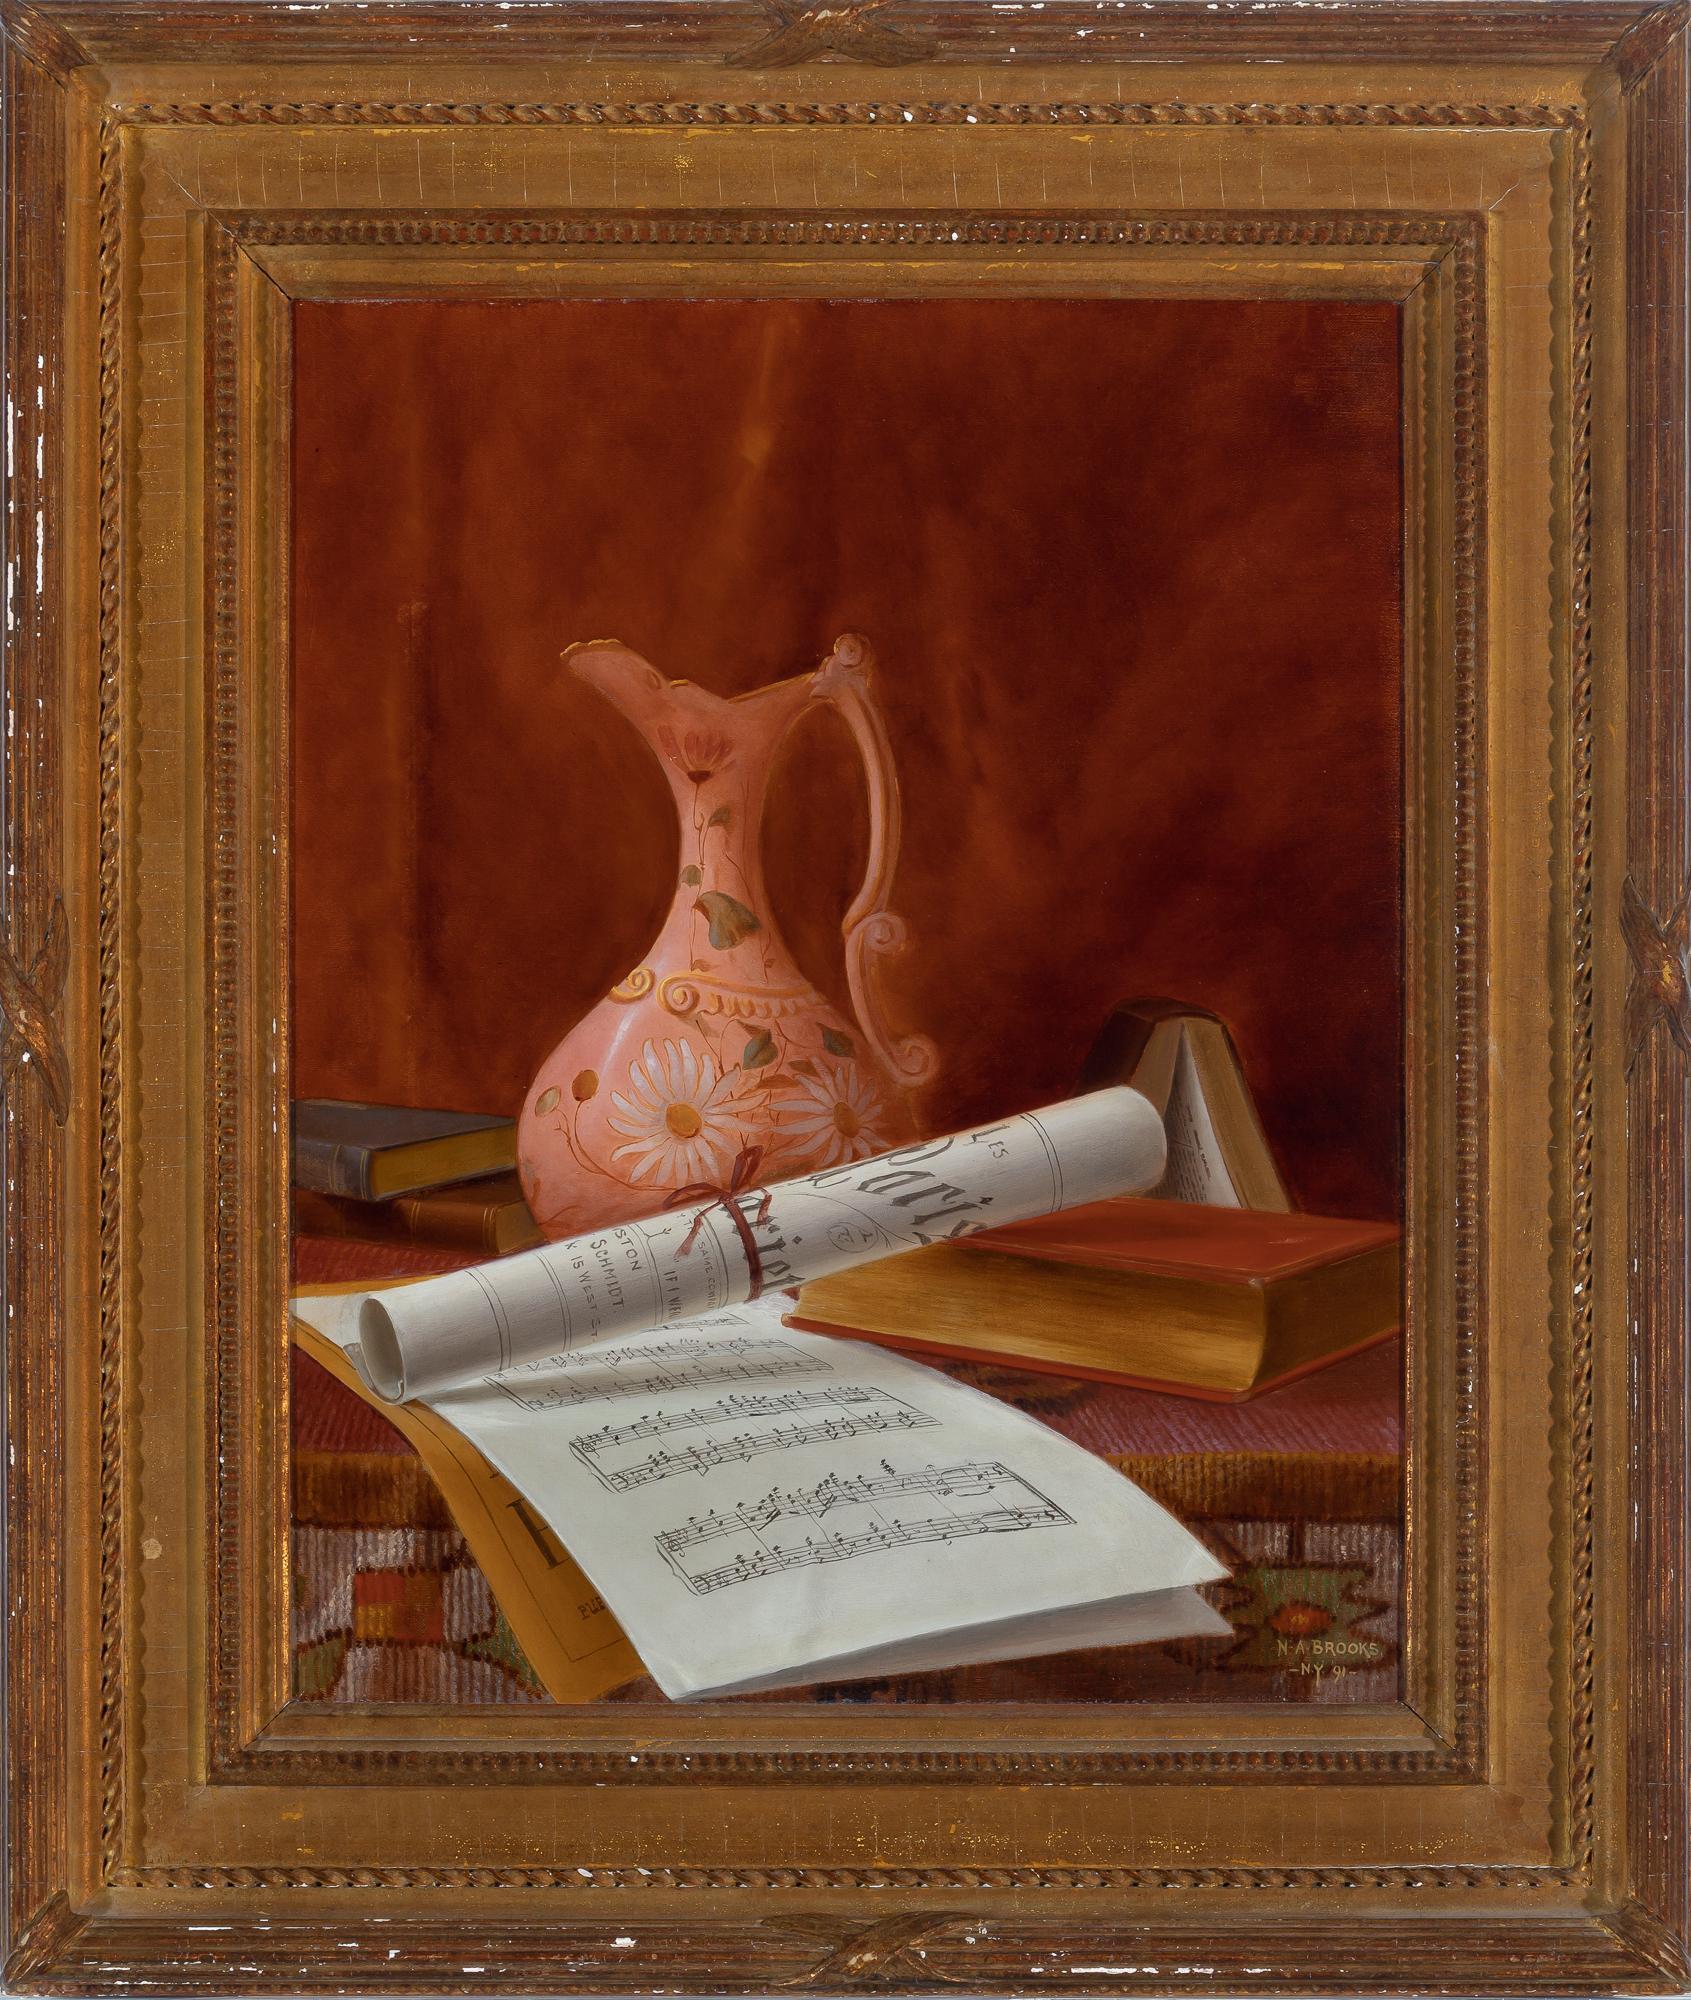 Nicholas Alden Brooks
Still Life with Pink Ewer and Sheet Music, 1891
Signed and dated lower right
Oil on canvas
20 1/8 x 16 inches

Considerable mystery surrounds the name Nicholas Alden Brooks. Other than having been active in New York City